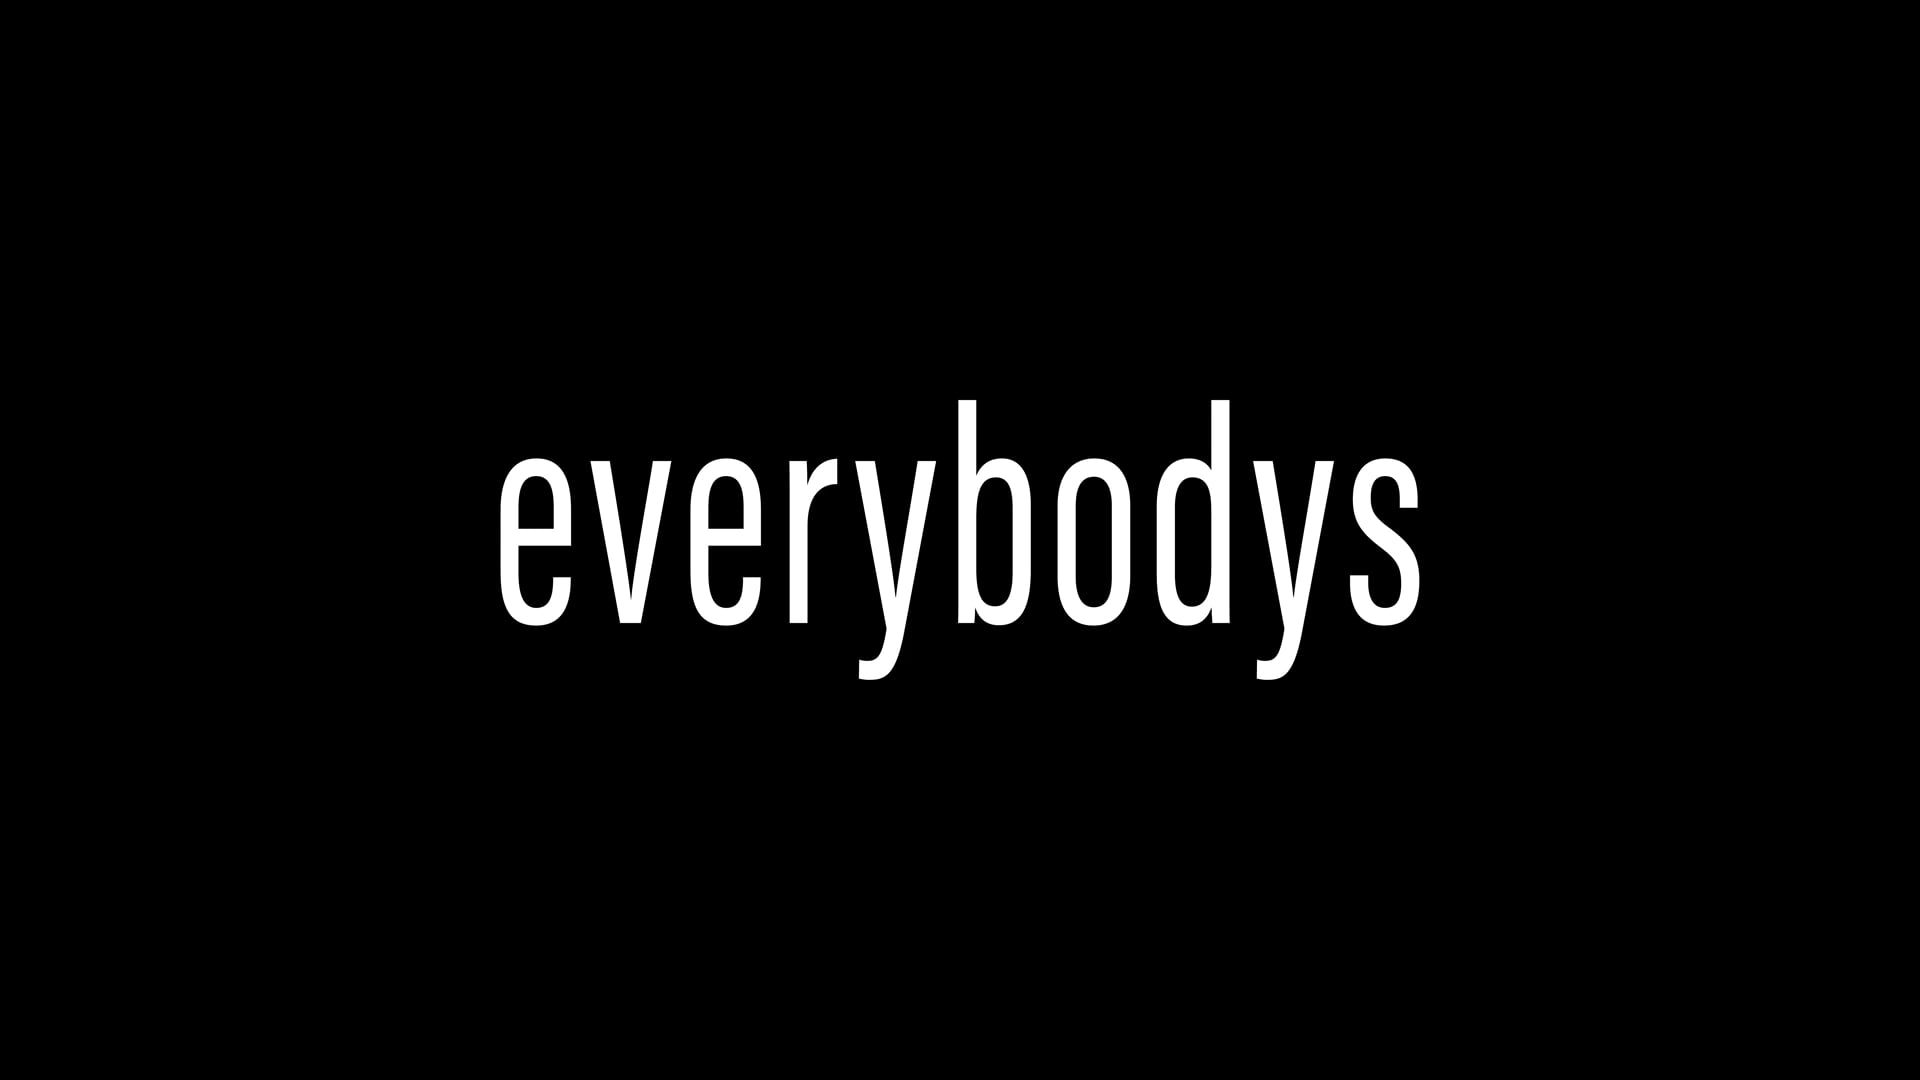 Everybodys - Food and Drink Promo